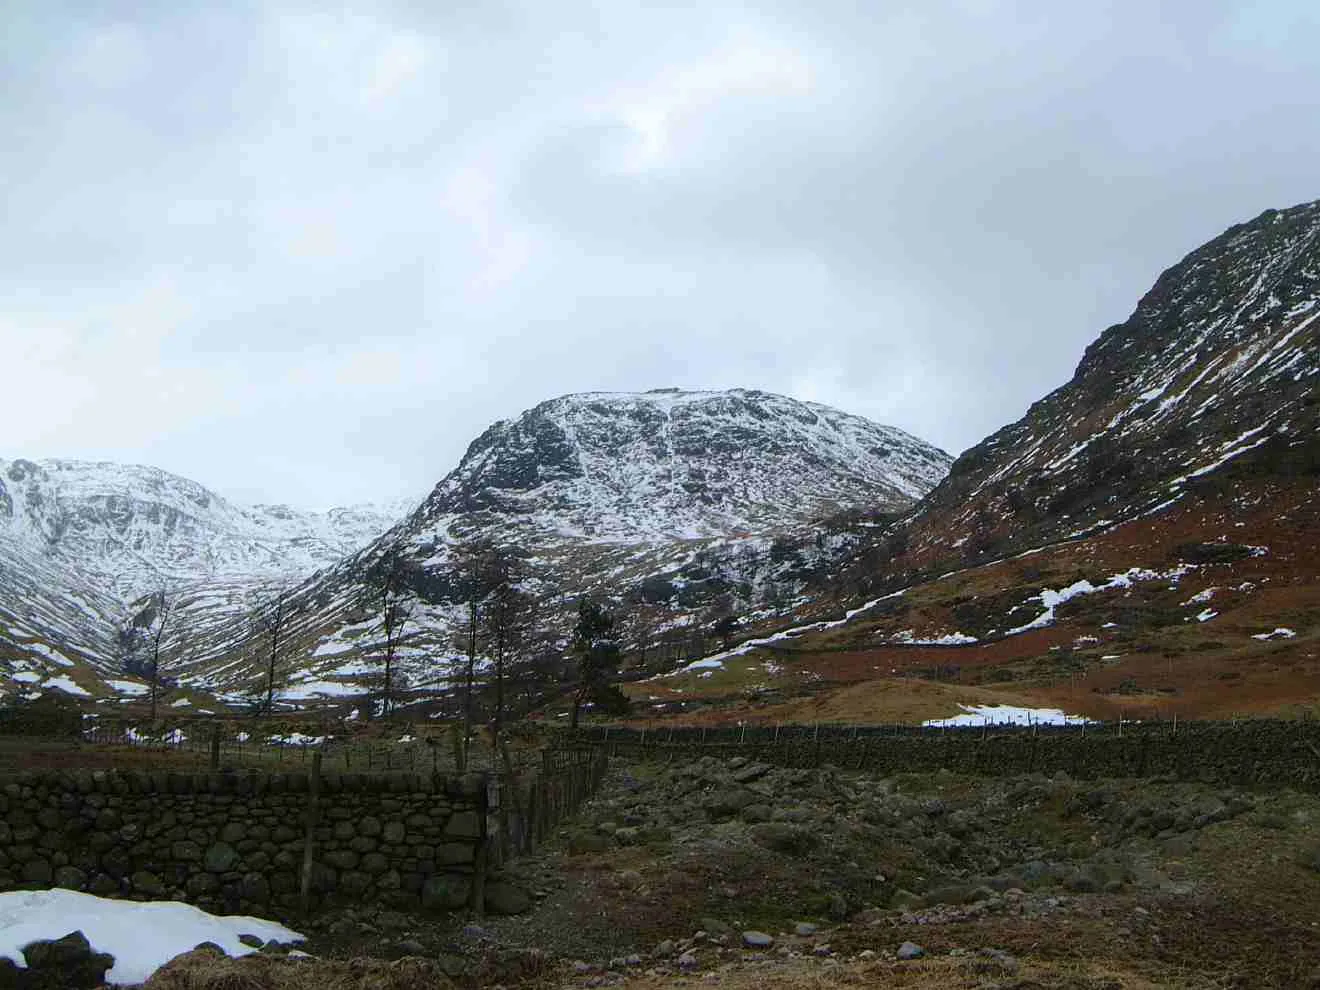 Photo showing: Seathwaite Fell from Seathwaite.
Personal photograph taken by Mick Knapton on 21st March 2006